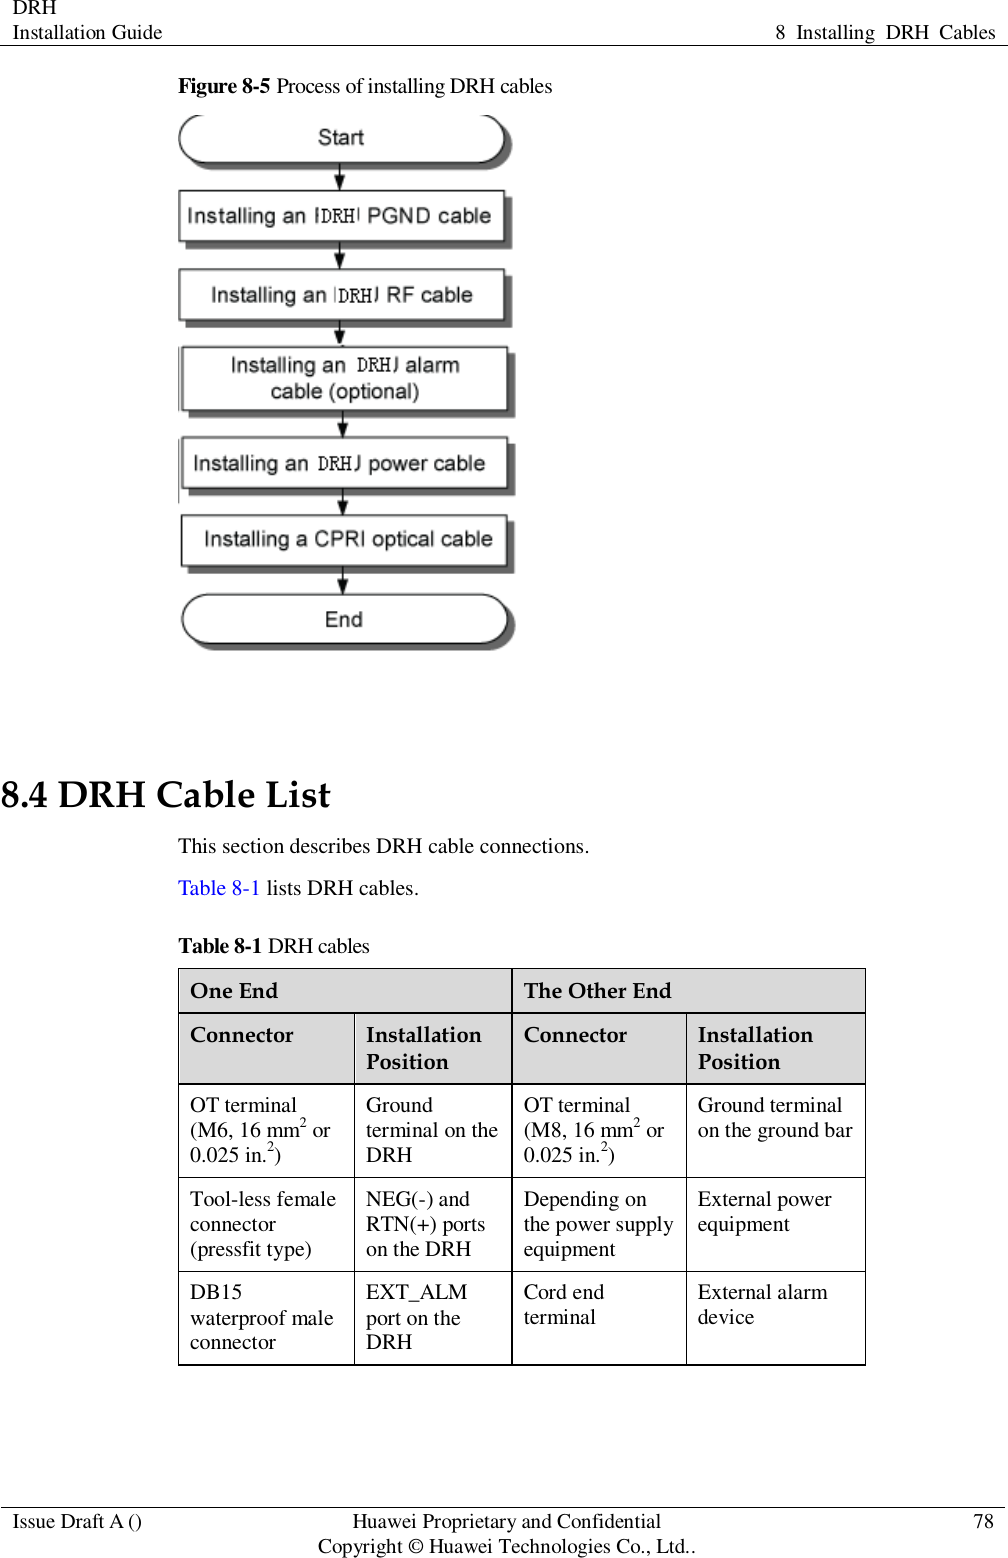 DRH   Installation Guide 8  Installing  DRH  Cables  Issue Draft A () Huawei Proprietary and Confidential                                     Copyright © Huawei Technologies Co., Ltd.. 78  Figure 8-5 Process of installing DRH cables   8.4 DRH Cable List This section describes DRH cable connections. Table 8-1 lists DRH cables. Table 8-1 DRH cables One End The Other End Connector Installation Position Connector Installation Position OT terminal (M6, 16 mm2 or 0.025 in.2) Ground terminal on the DRH OT terminal (M8, 16 mm2 or 0.025 in.2) Ground terminal on the ground bar Tool-less female connector (pressfit type) NEG(-) and RTN(+) ports on the DRH Depending on the power supply equipment External power equipment DB15 waterproof male connector EXT_ALM port on the DRH Cord end terminal External alarm device 